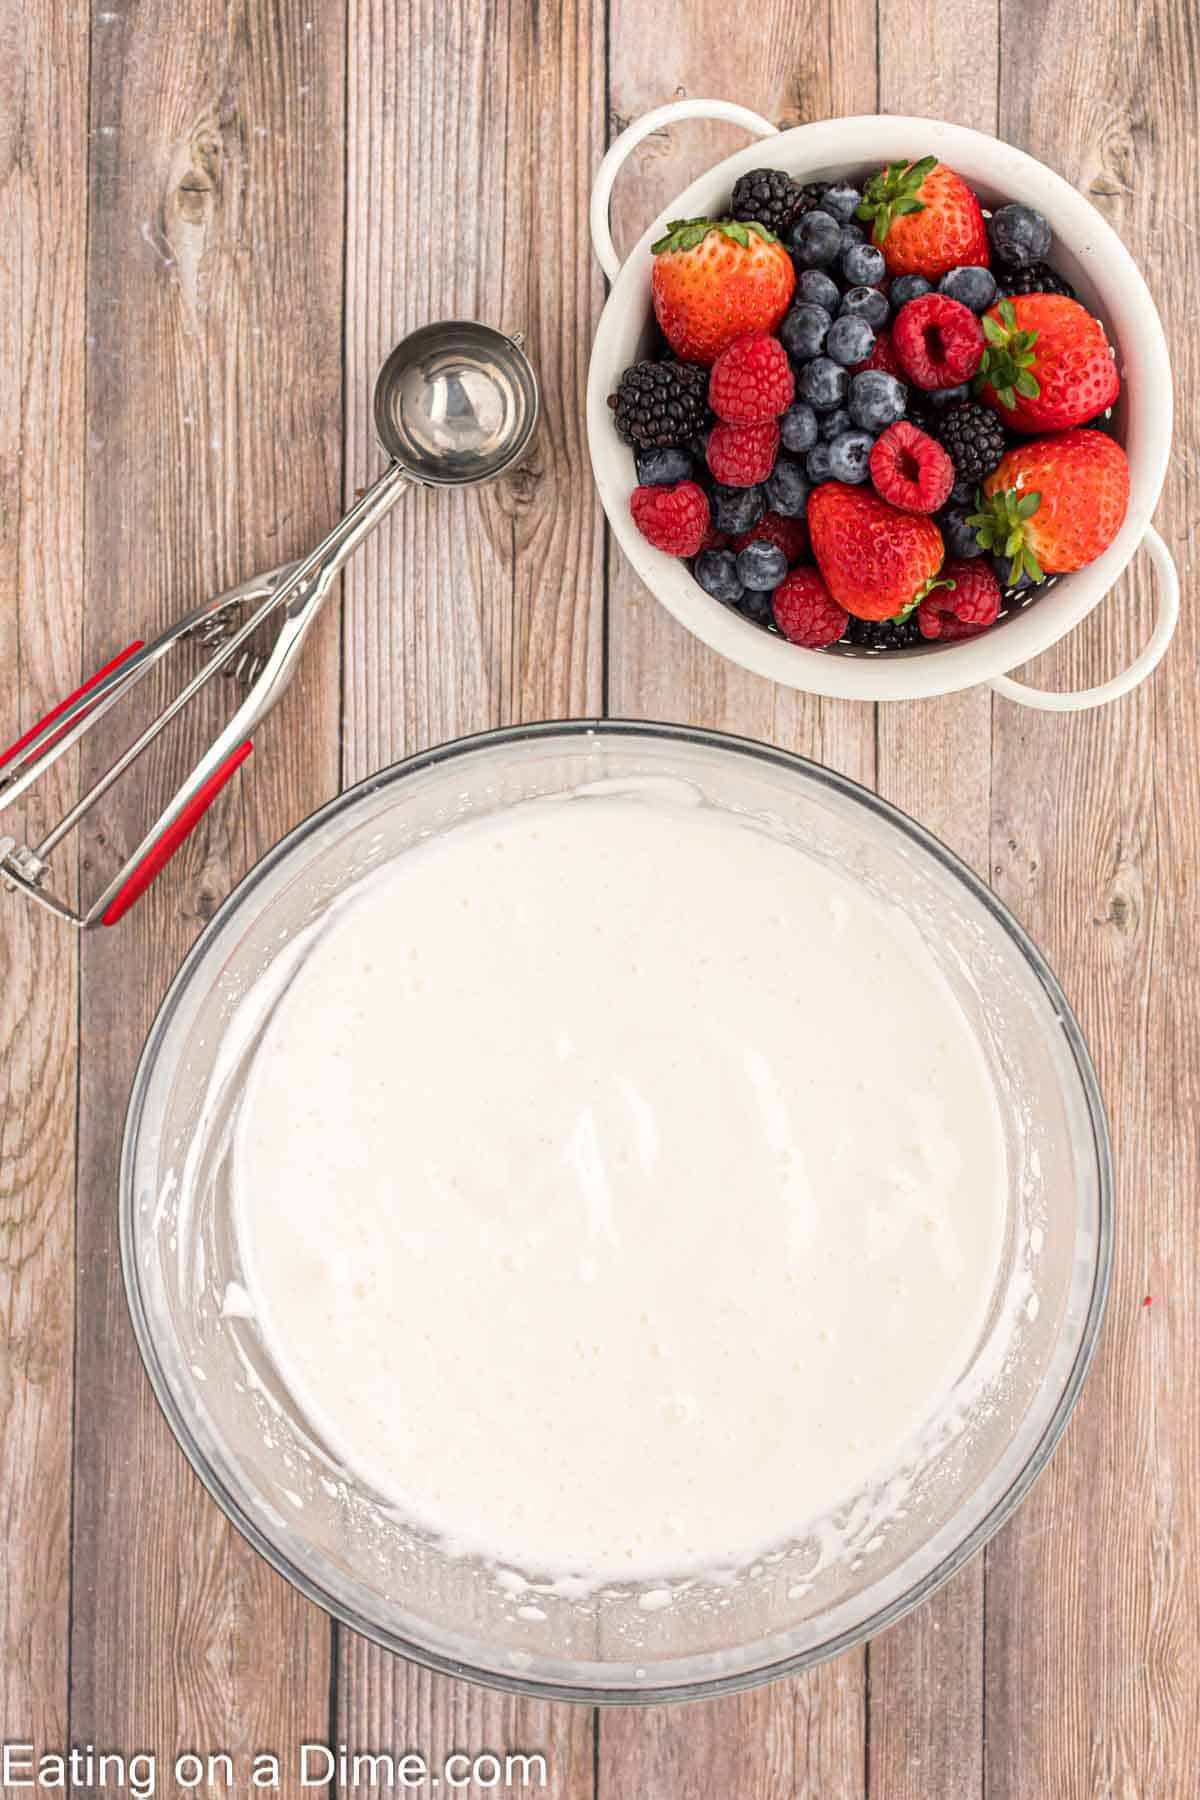 Combine the angel food cake ingredients in a bowl with a bowl of fresh fruit on the side